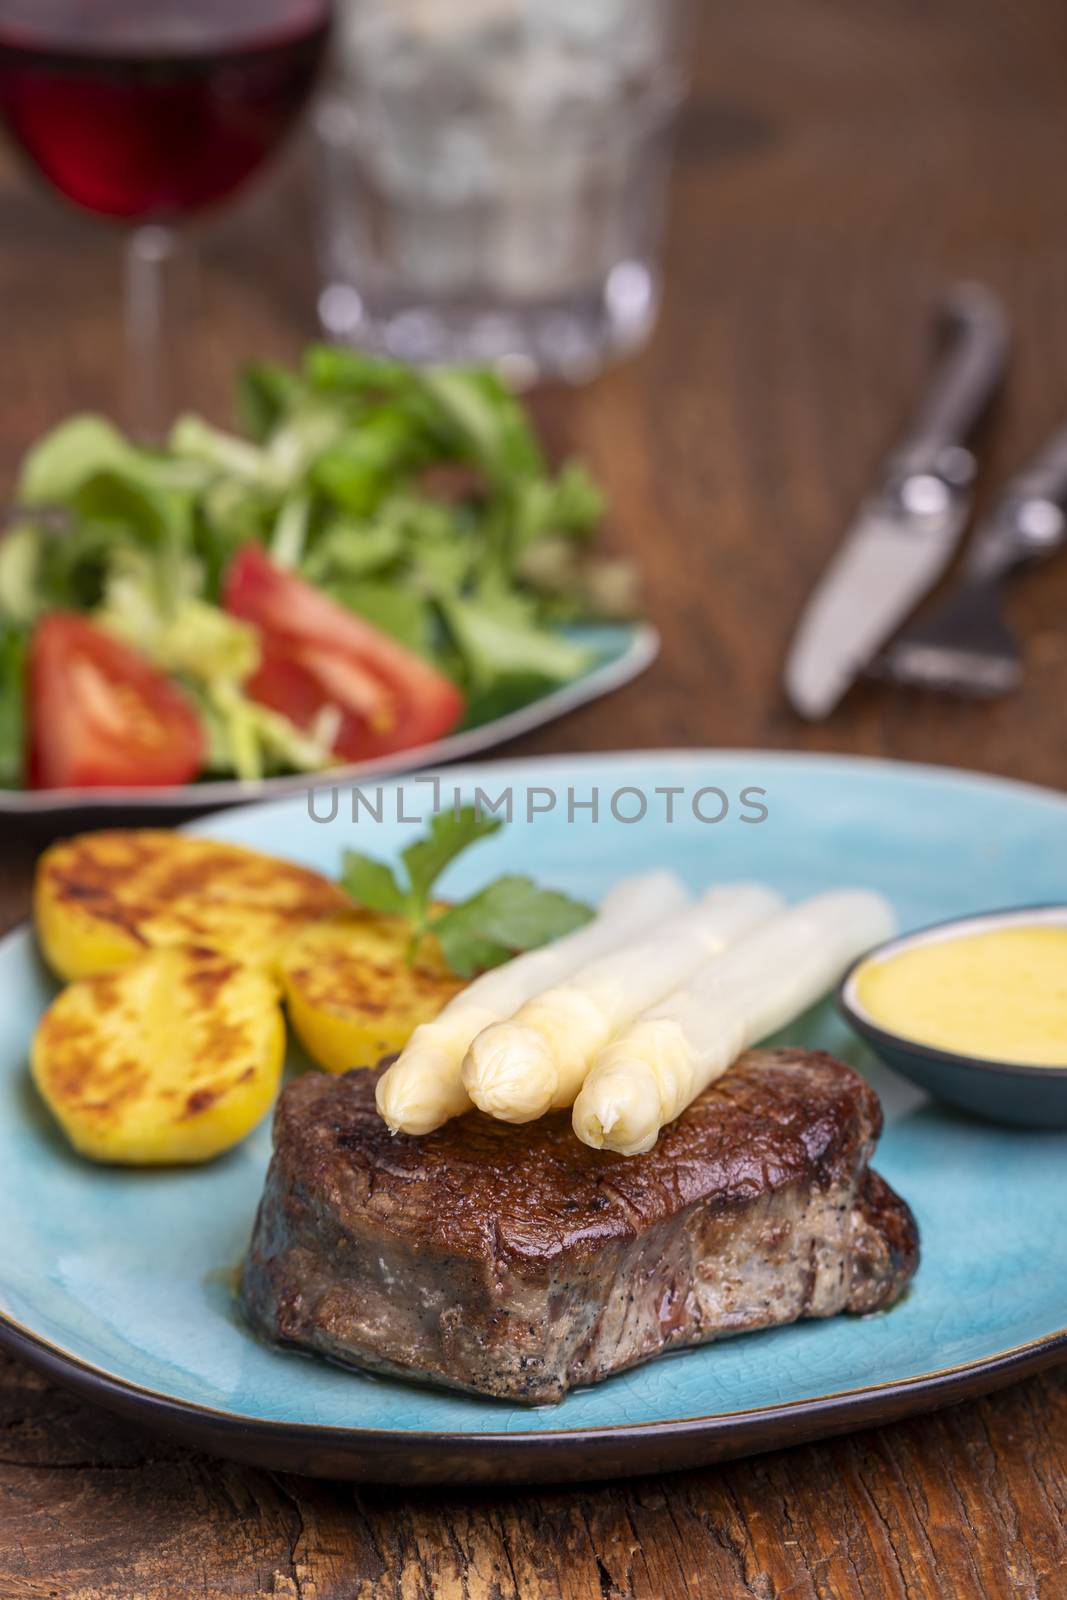 asparagus with potatoes and a steak by bernjuer